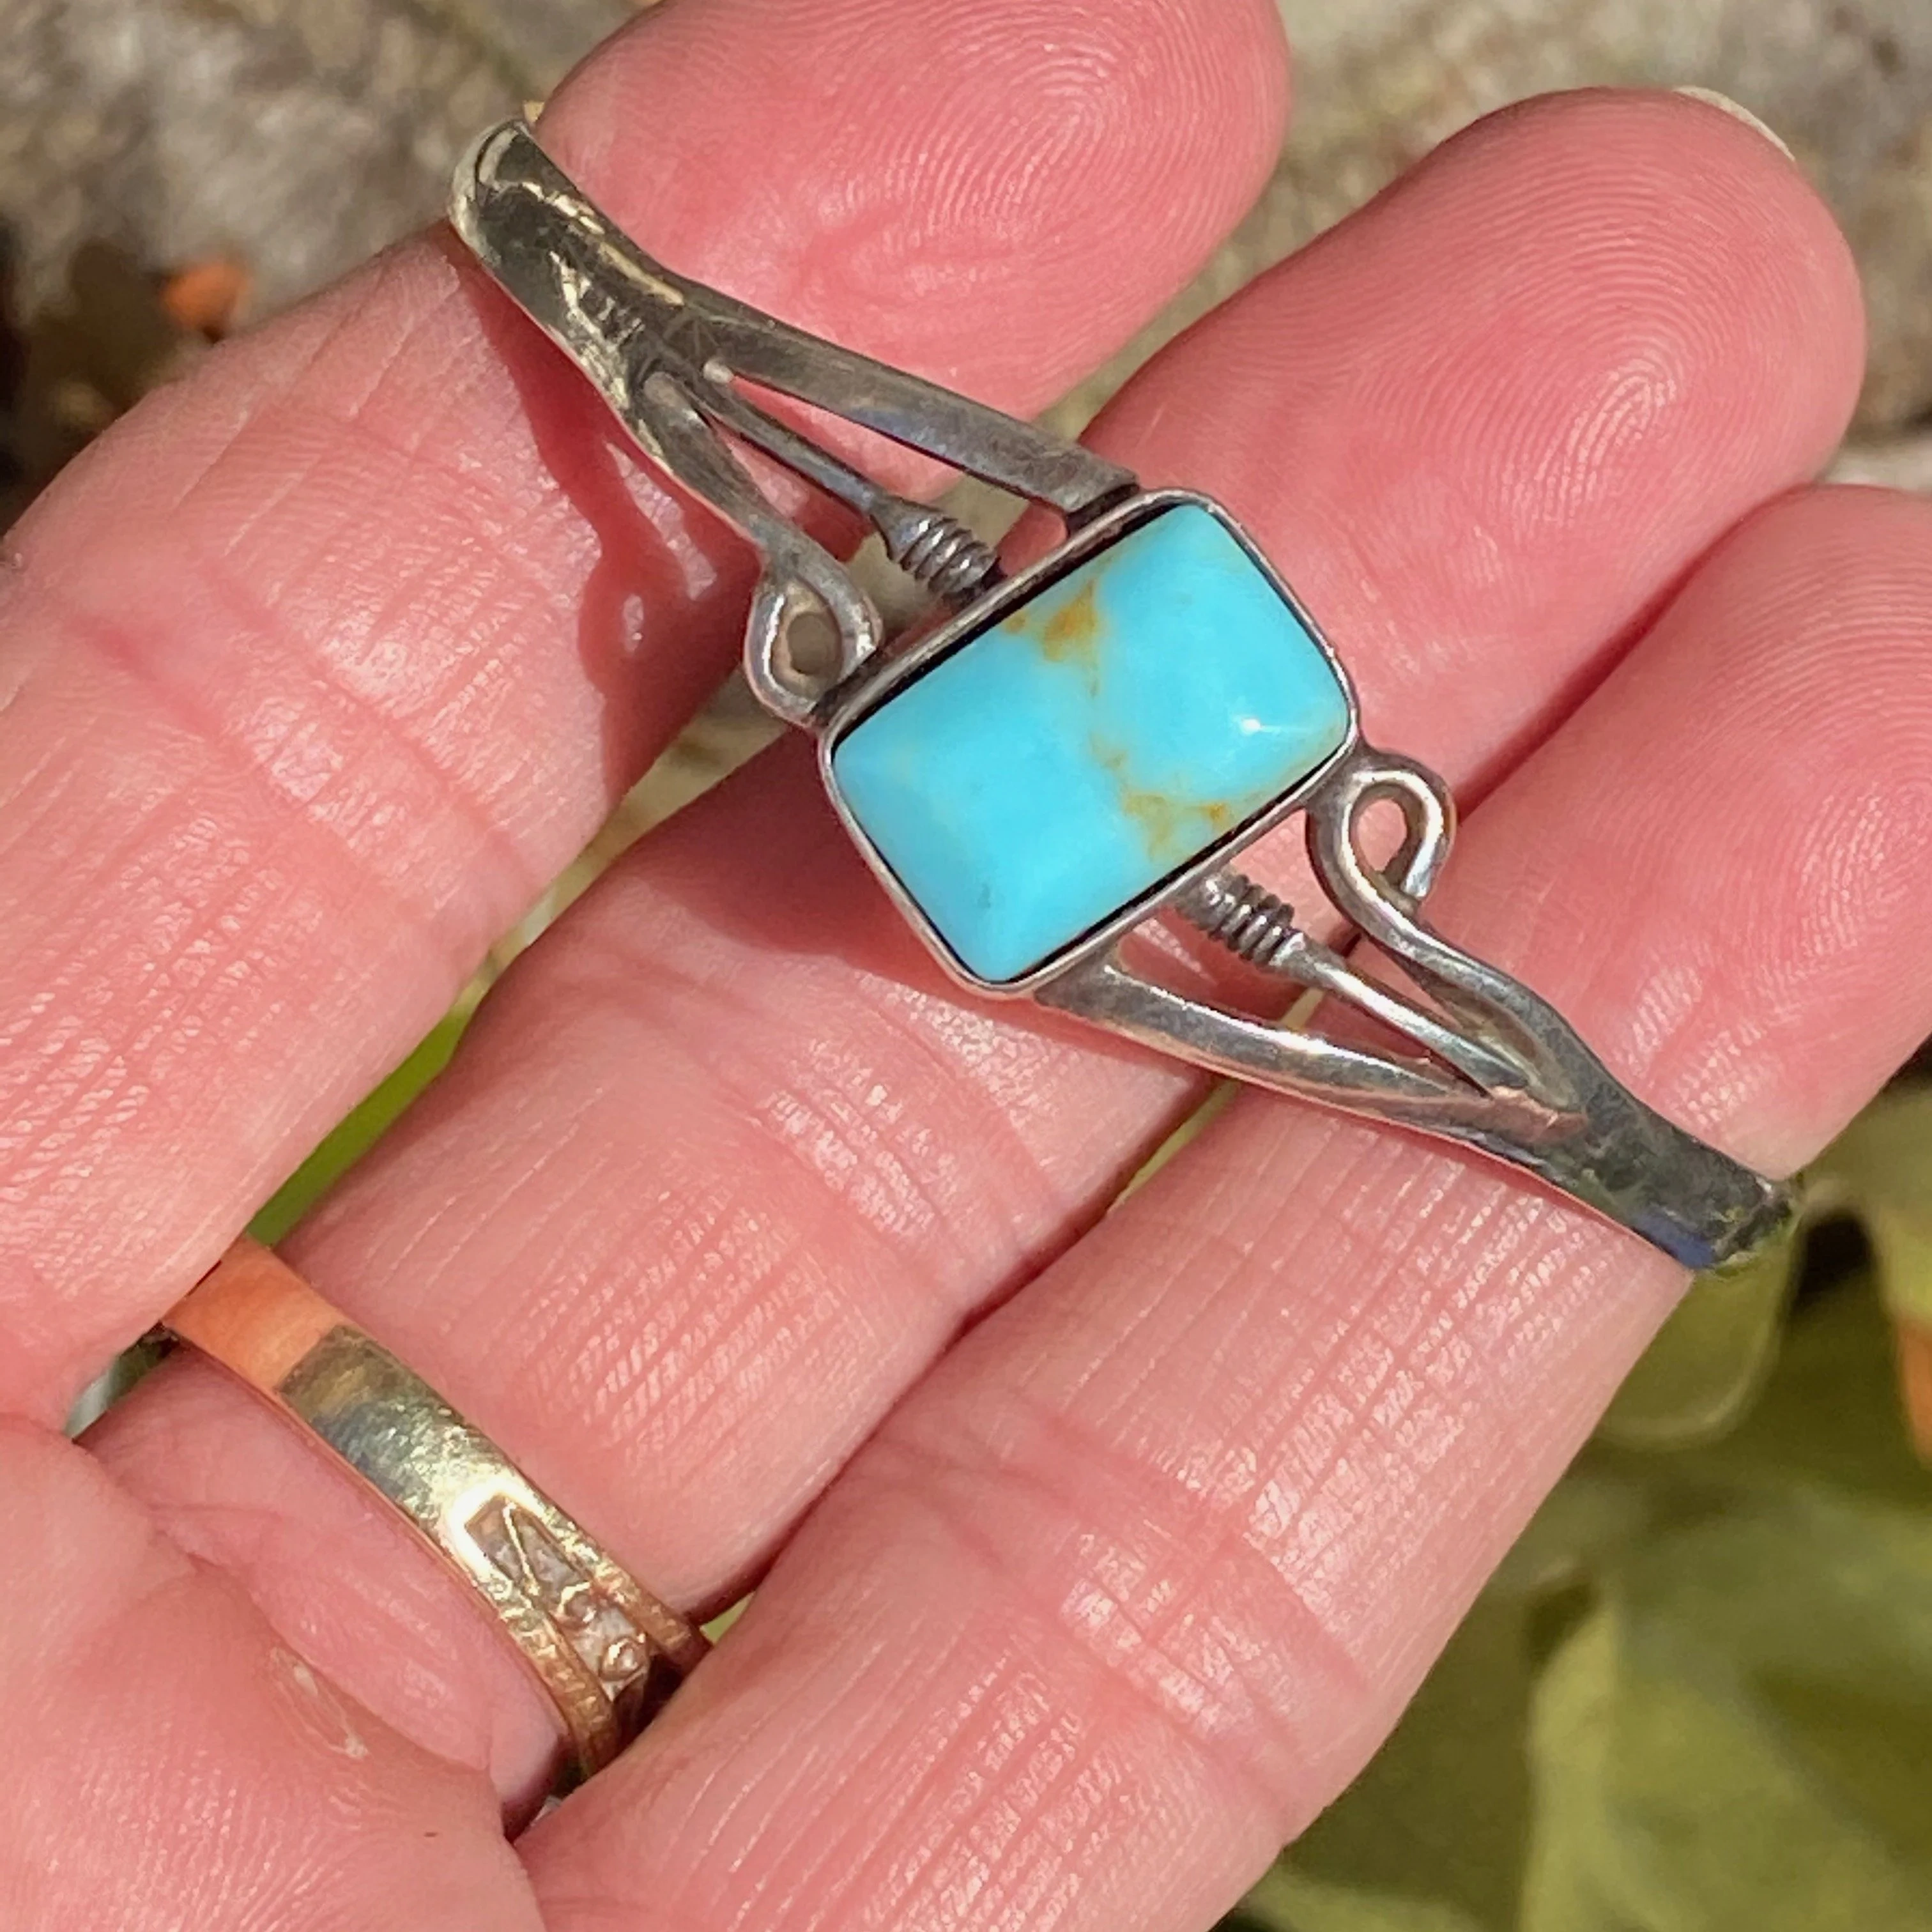 Southwestern Sterling Silver Cuff Bracelet with Rectangular Turquoise Stone